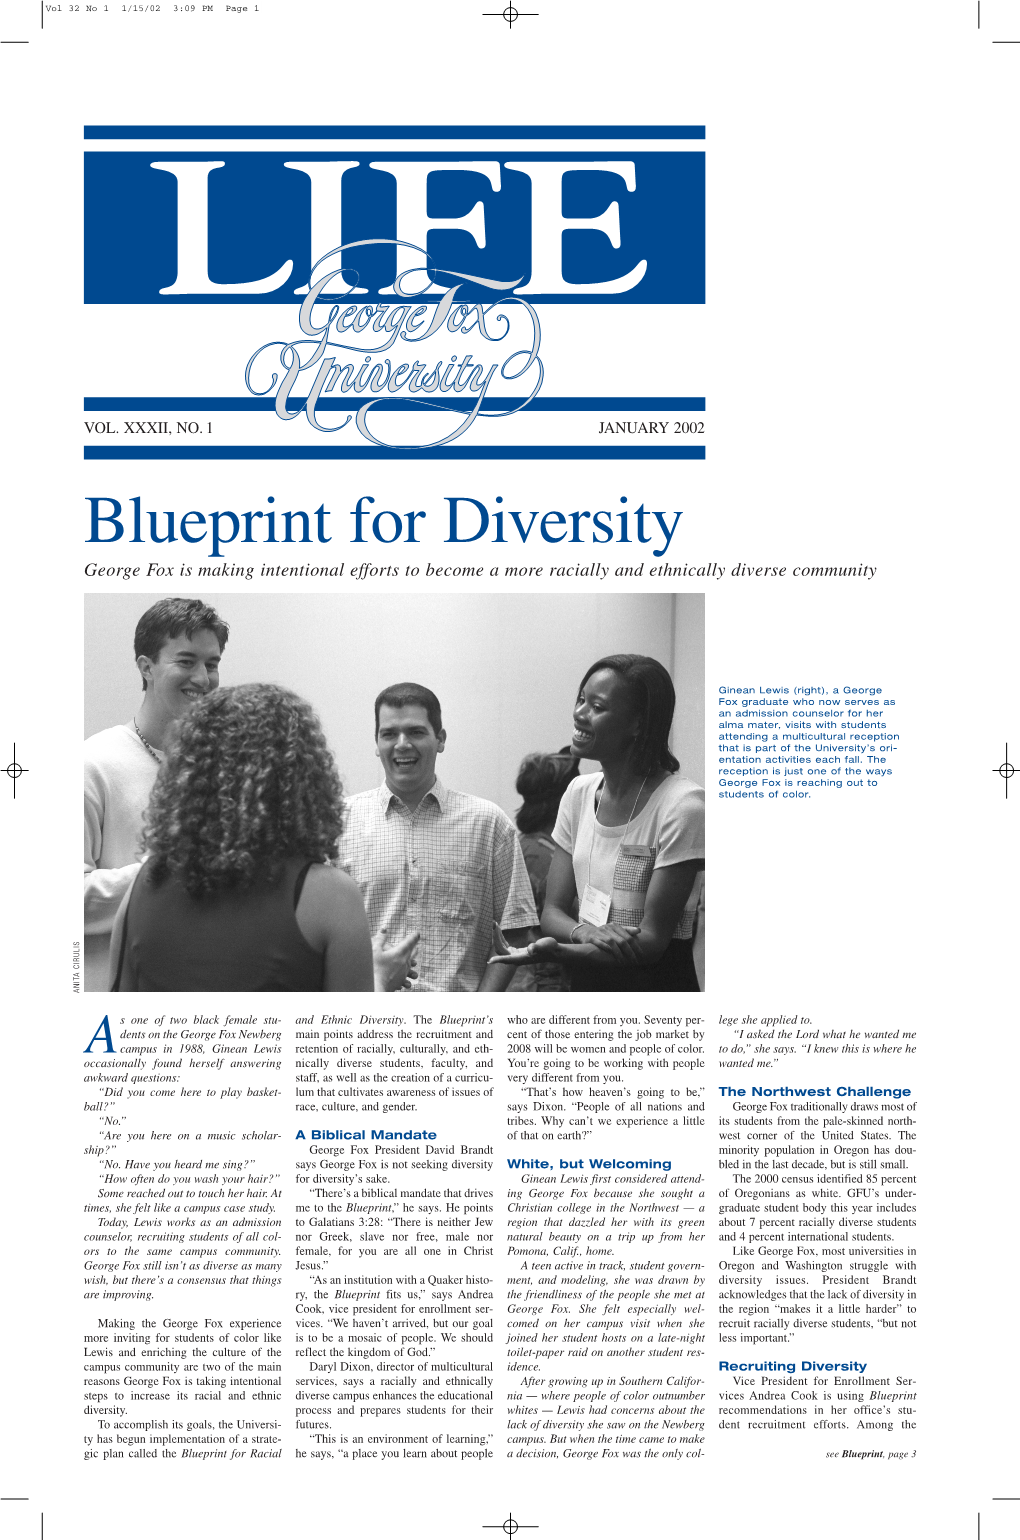 Blueprint for Diversity George Fox Is Making Intentional Efforts to Become a More Racially and Ethnically Diverse Community